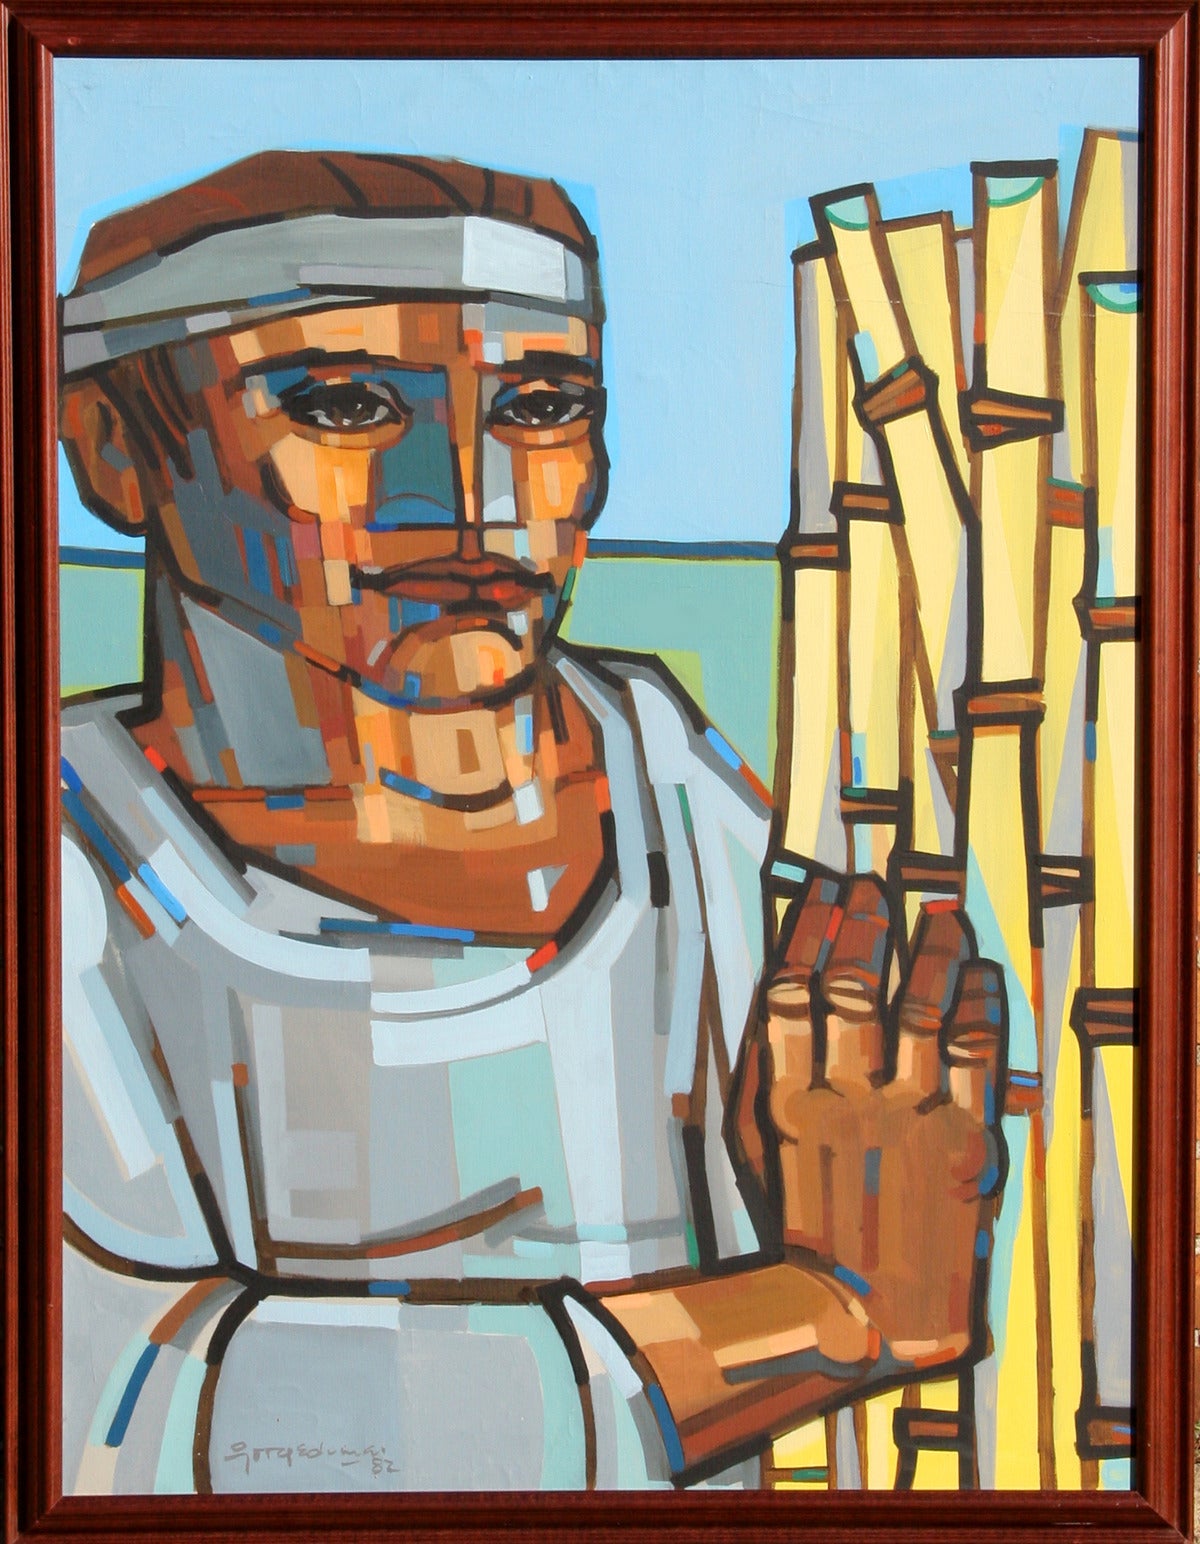 Man with Reeds, Oil Painting on Canvas by Jorge Dumas